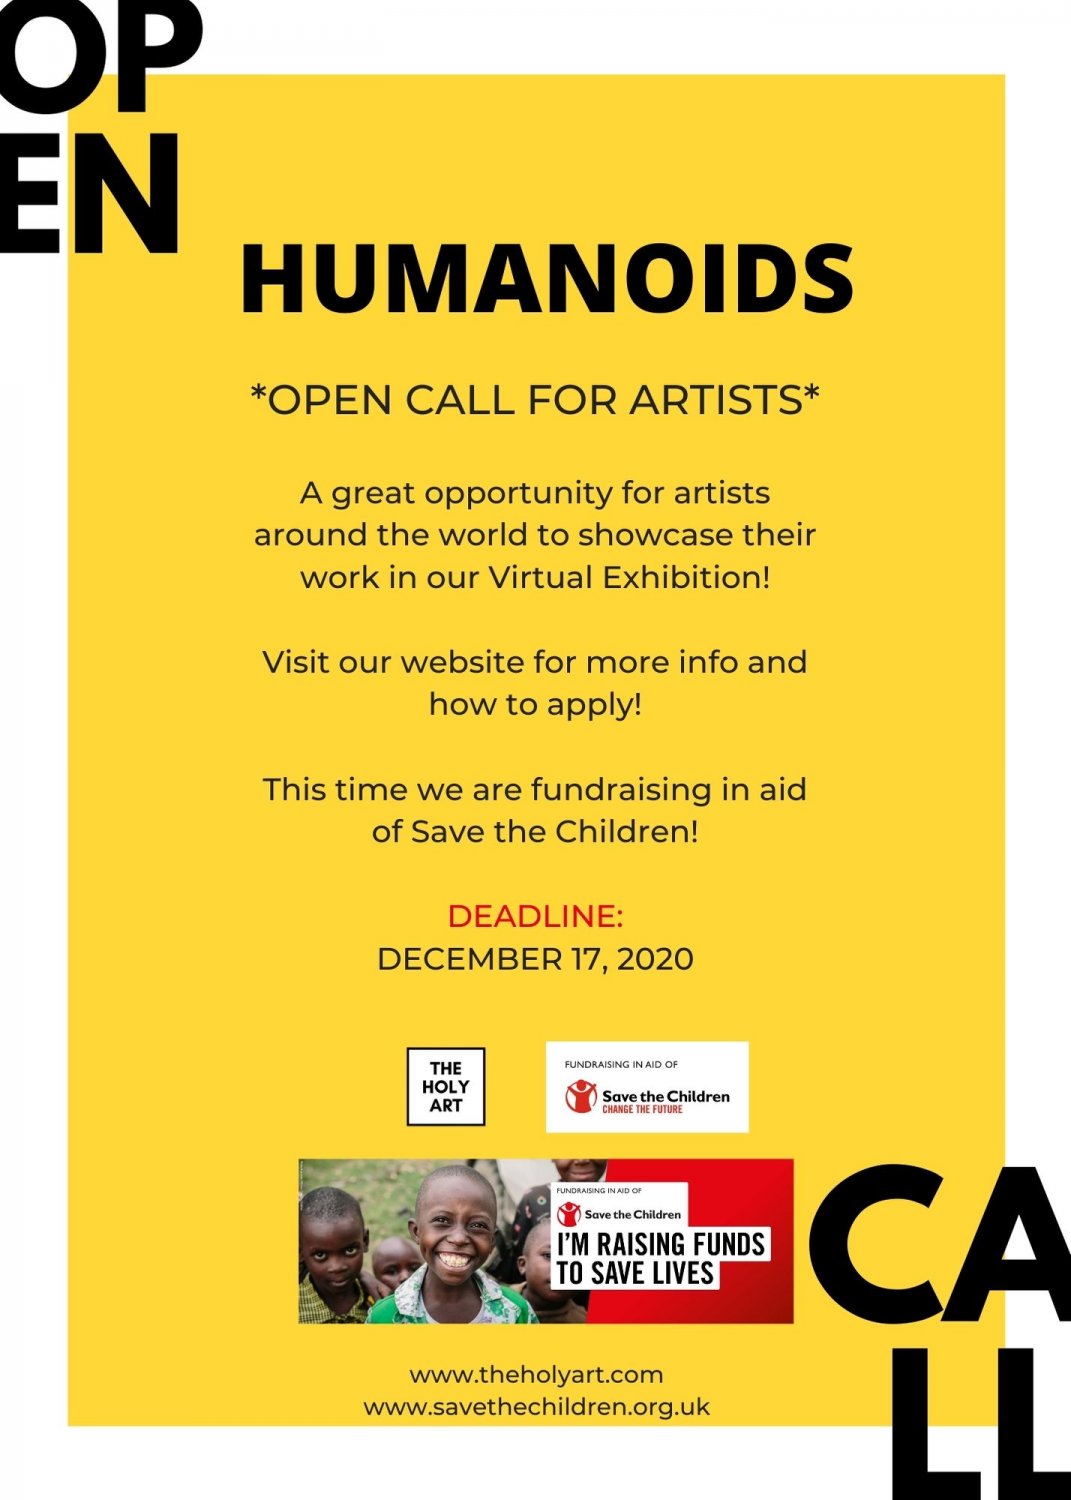 Call for Artists OPEN CALL FOR ARTISTS HUMANOIDS